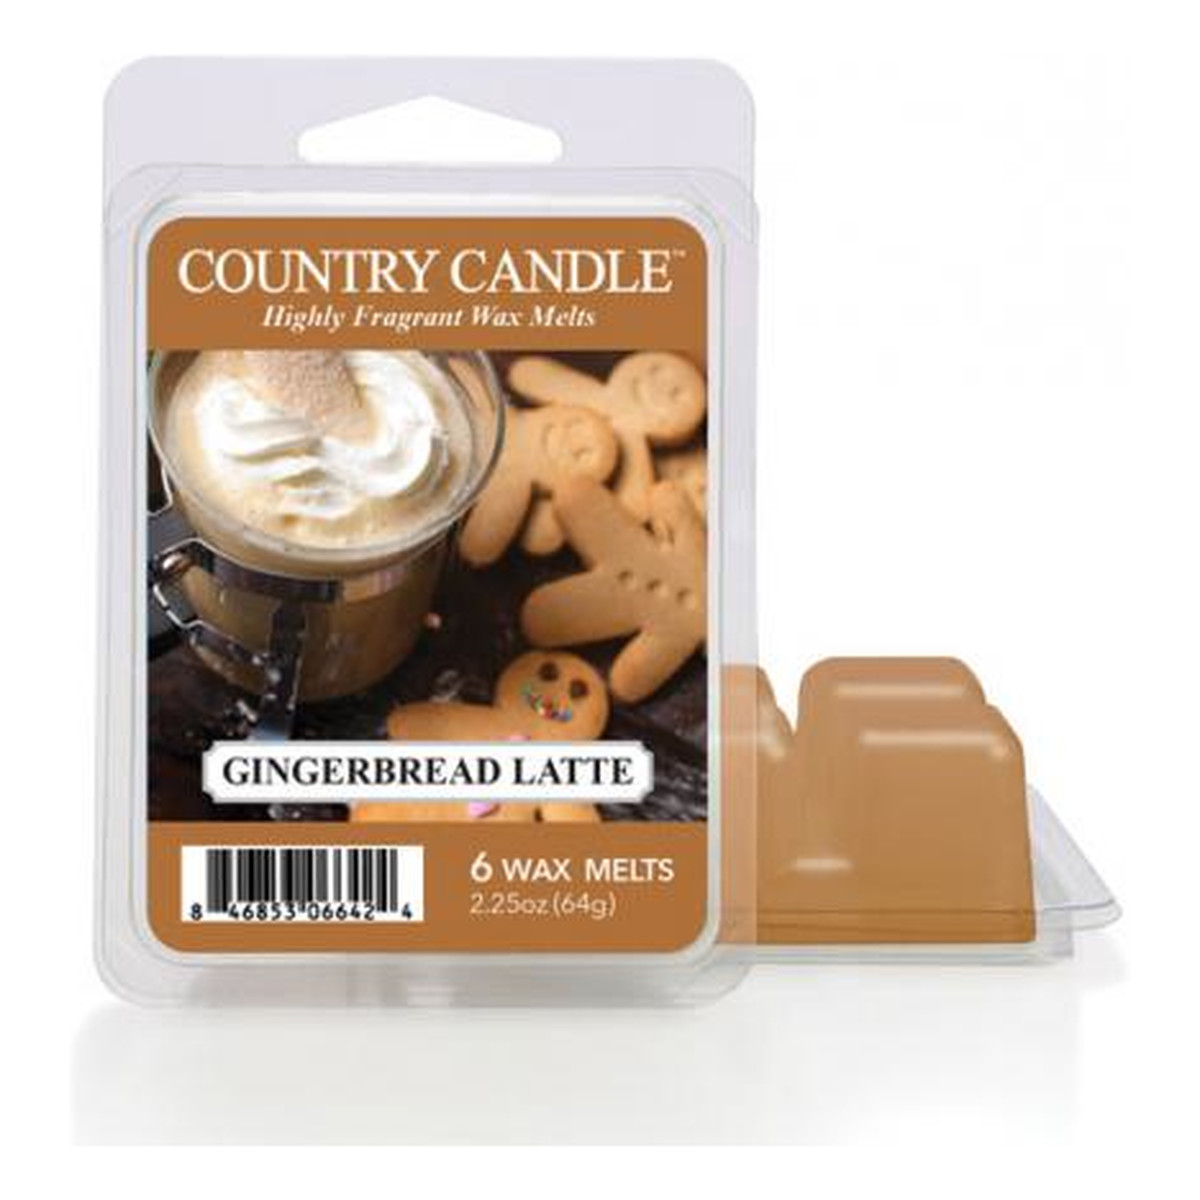 Country Candle Wax wosk zapachowy "potpourri" gingerbread latte 64g